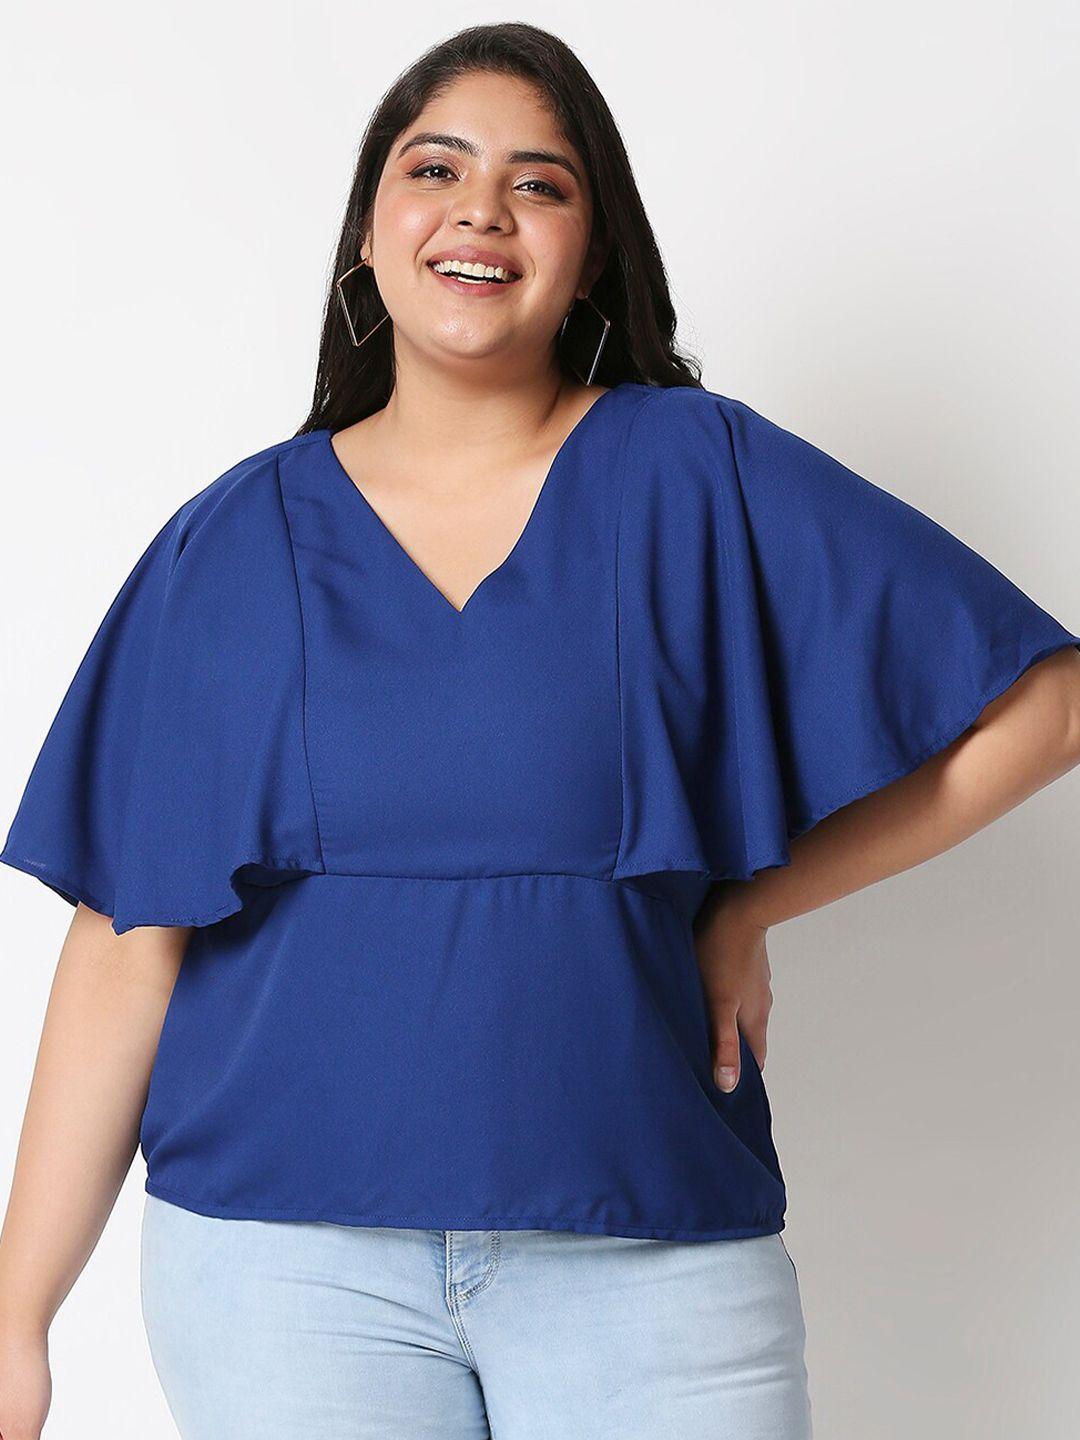 20dresses plus size women blue flared sleeve crepe cinched waist top